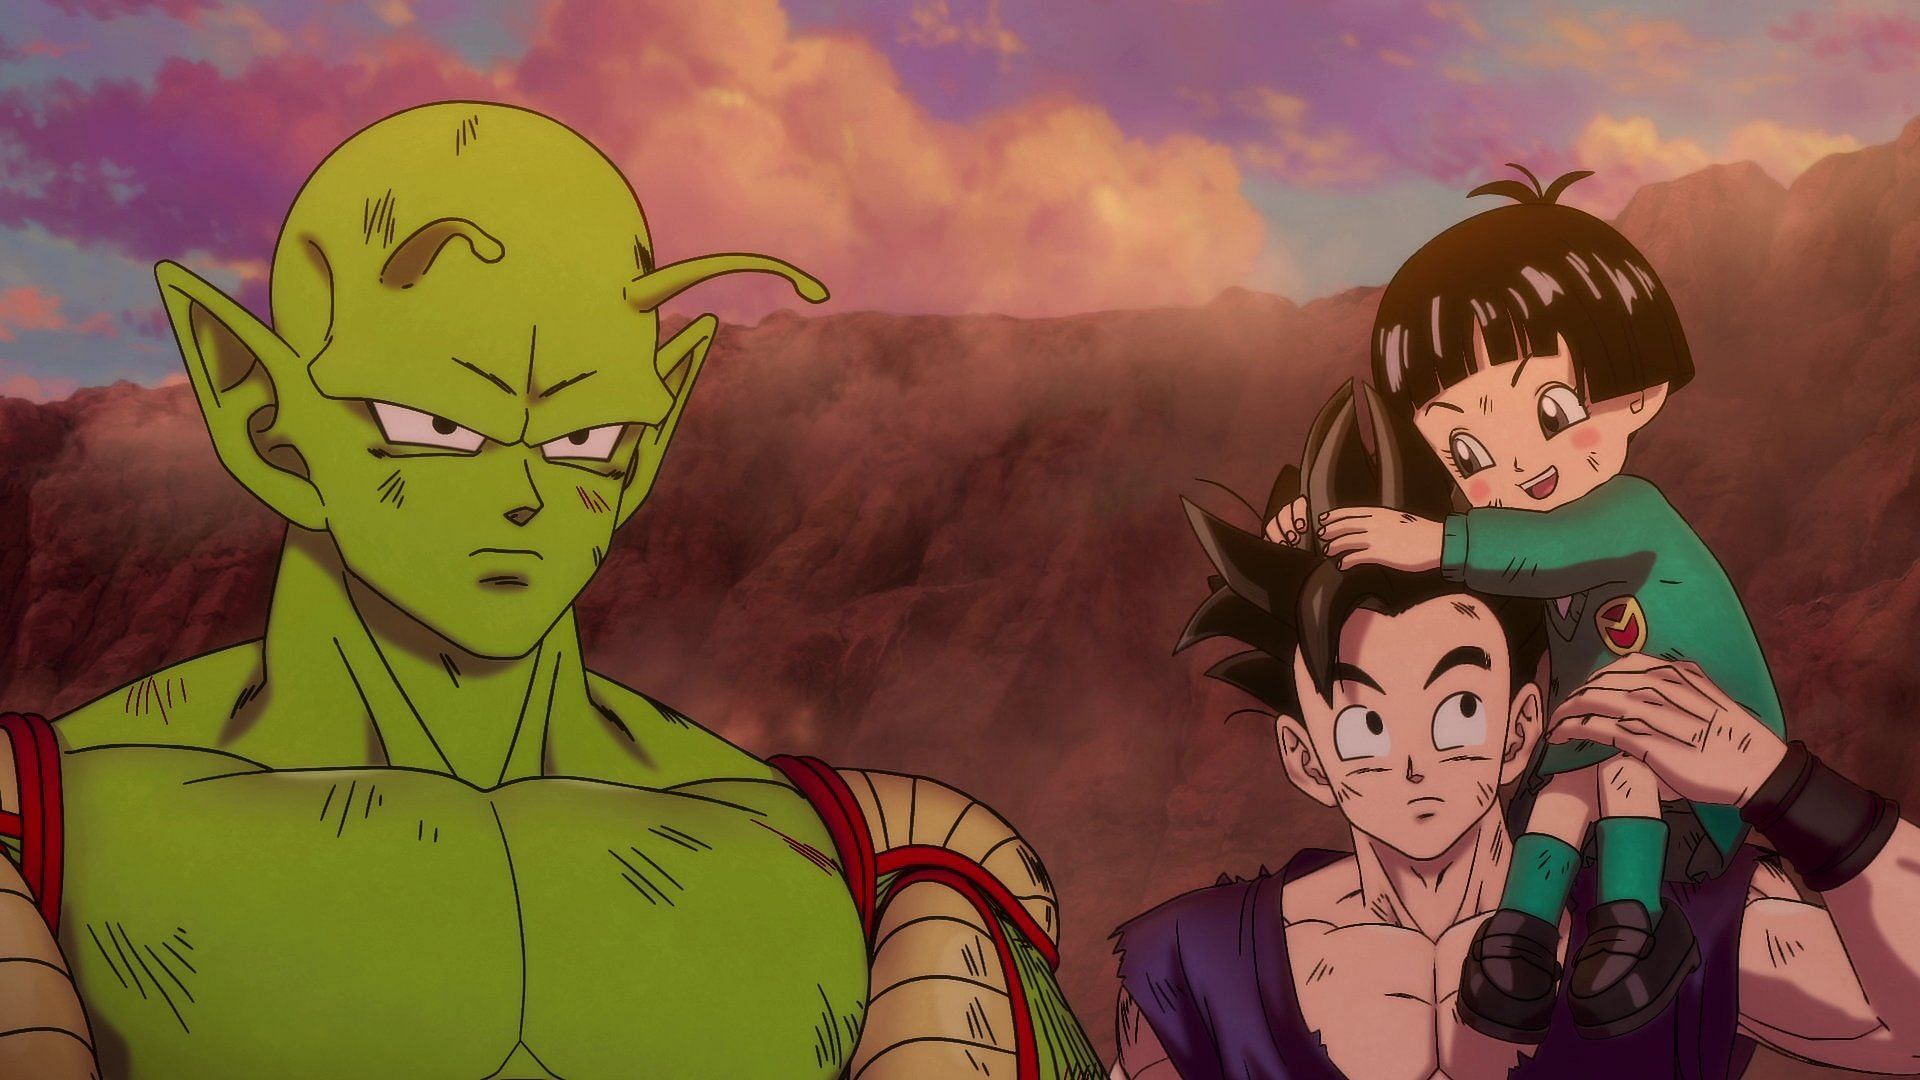 Dragon Ball Super chapter 91 focuses on Piccolo and Pan's quality time as  Krillin is put on a new case